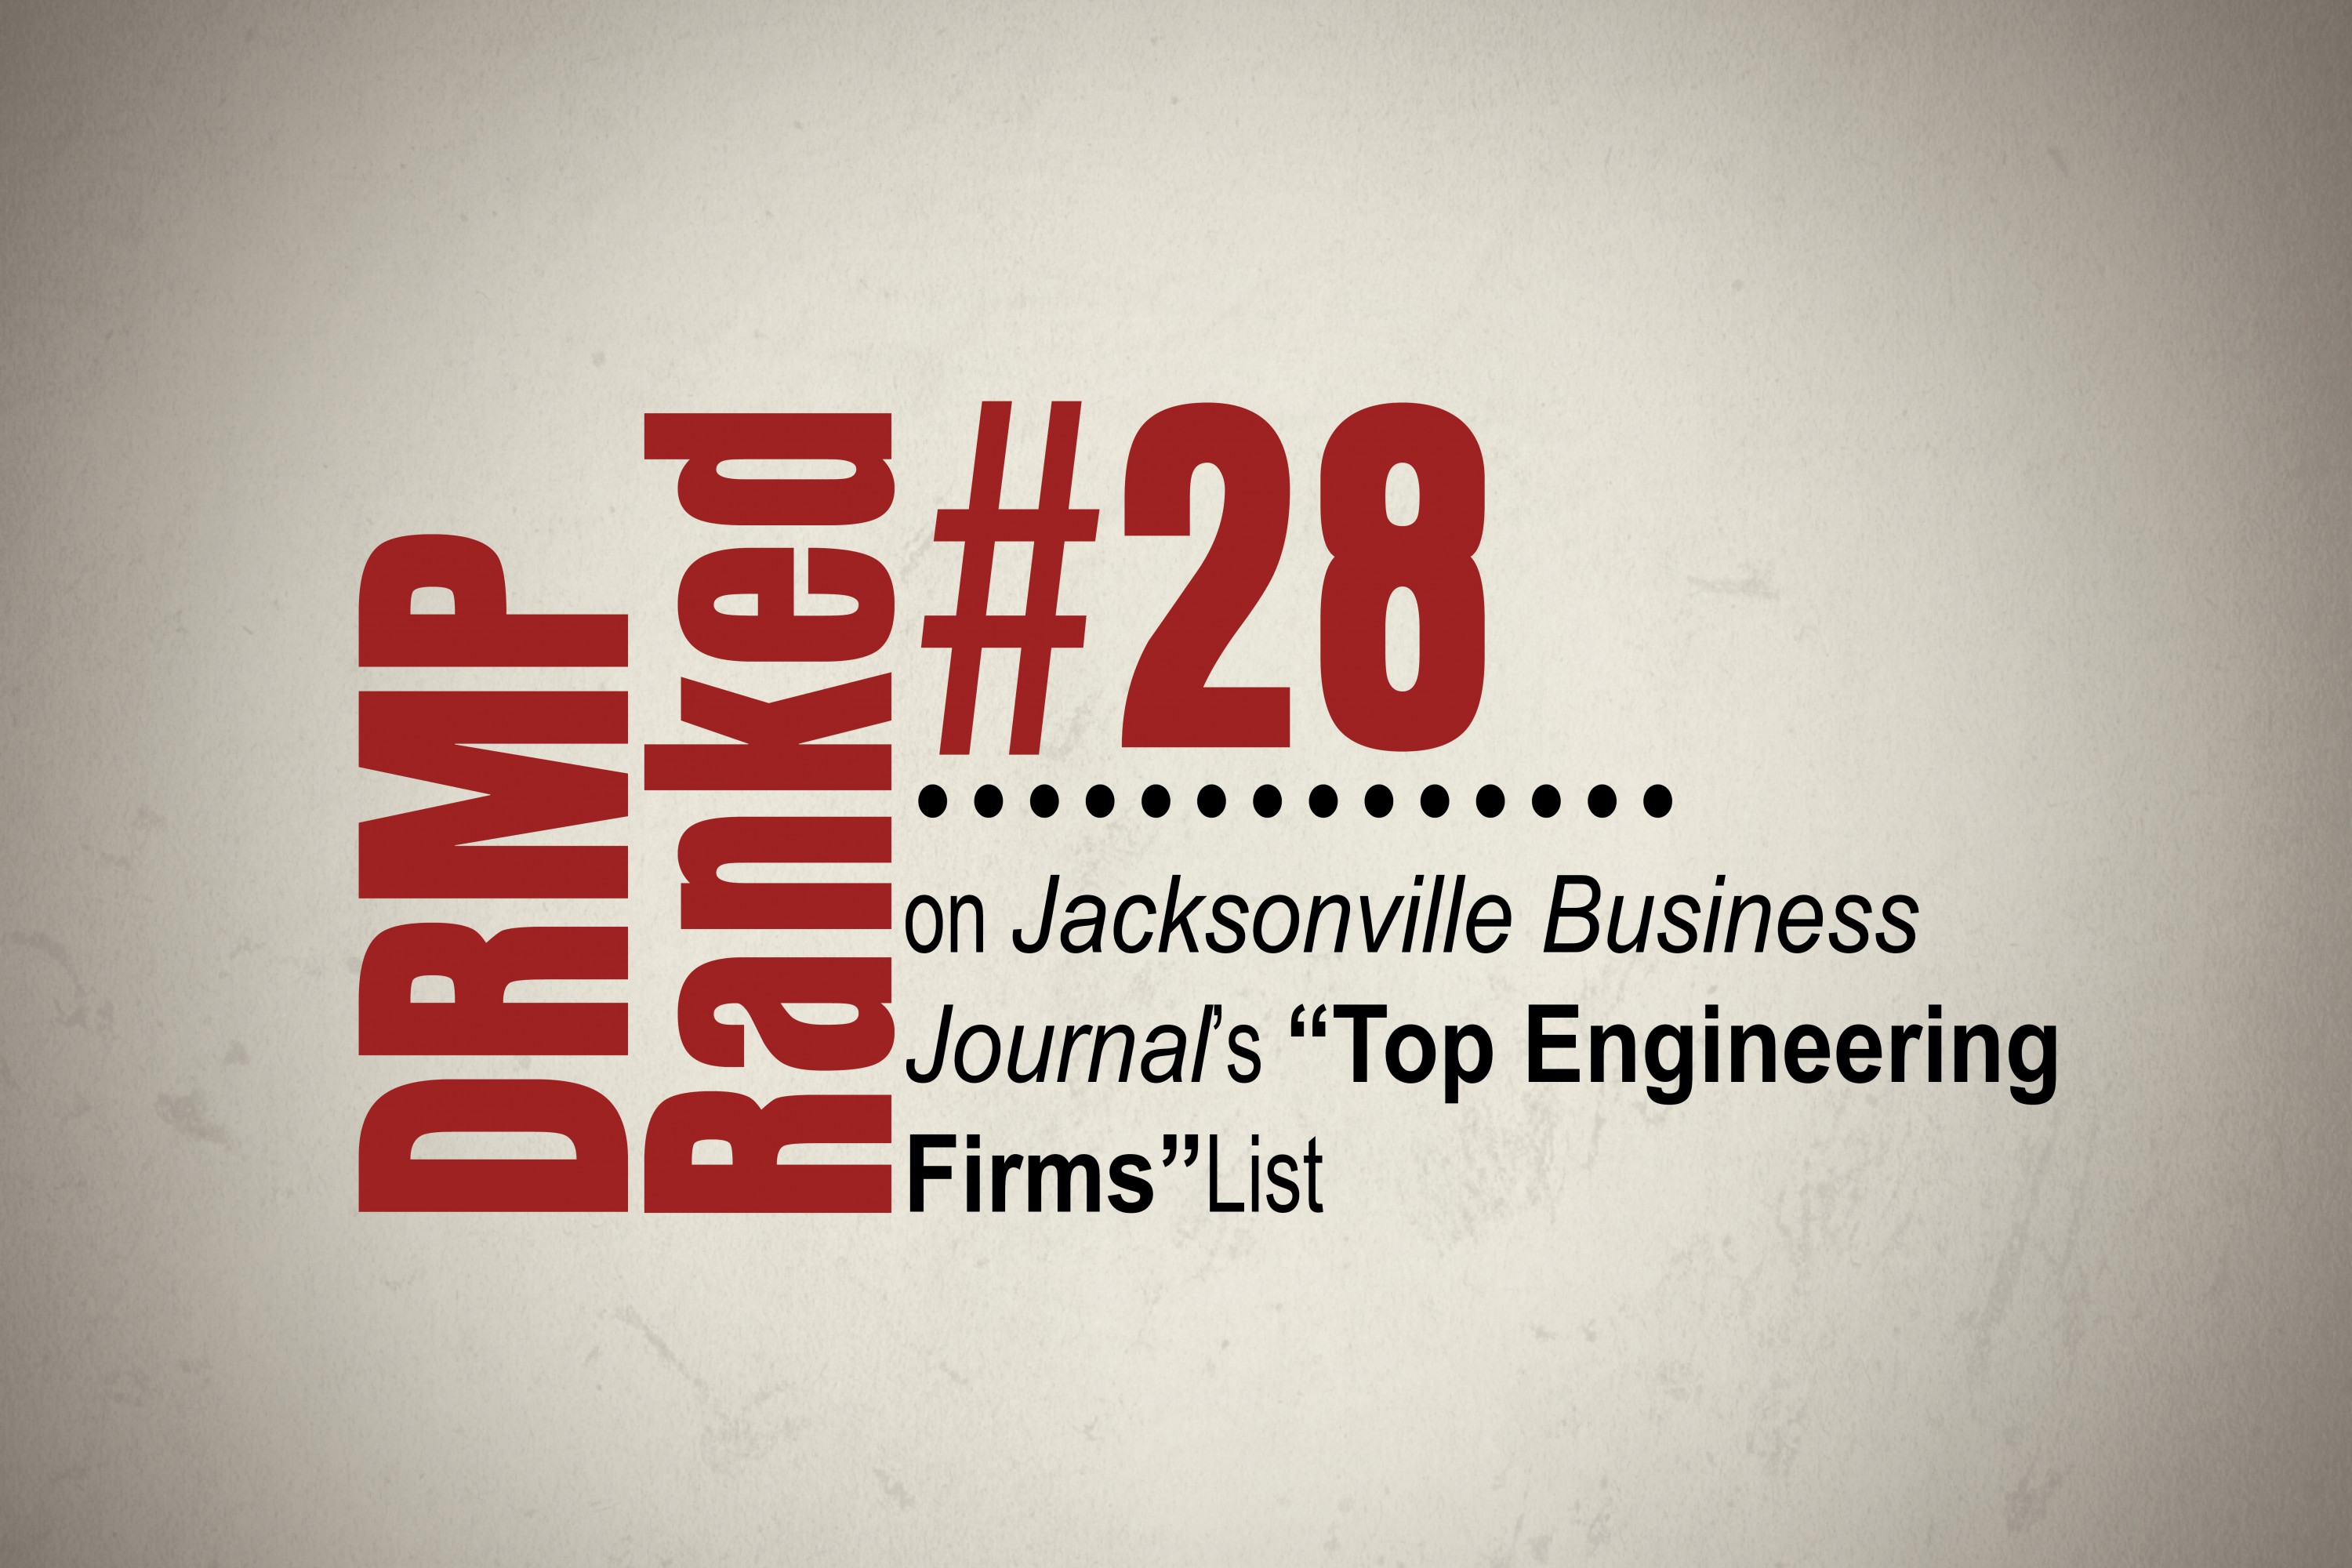 DRMP Jacksonville Office Ranked Among Top Engineering Firms